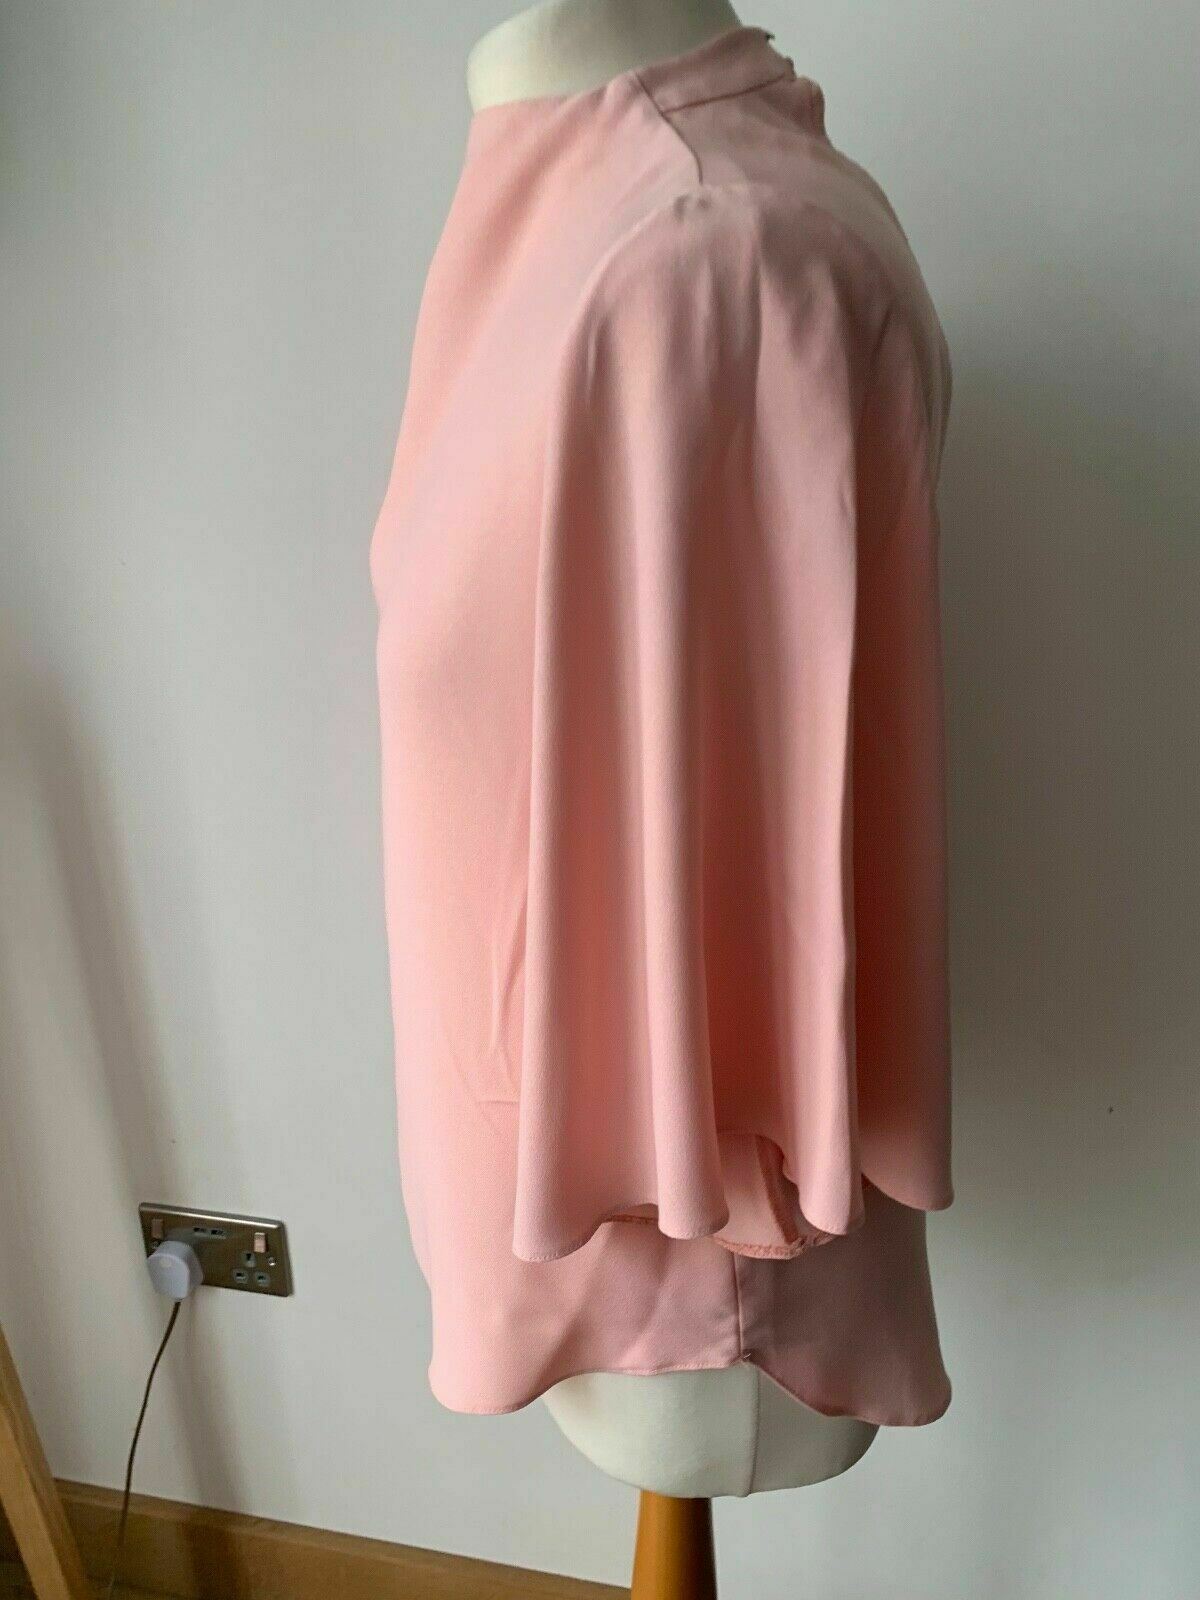 River Island Light Pink Blouse High Neck Size 8  Bell Sleeves